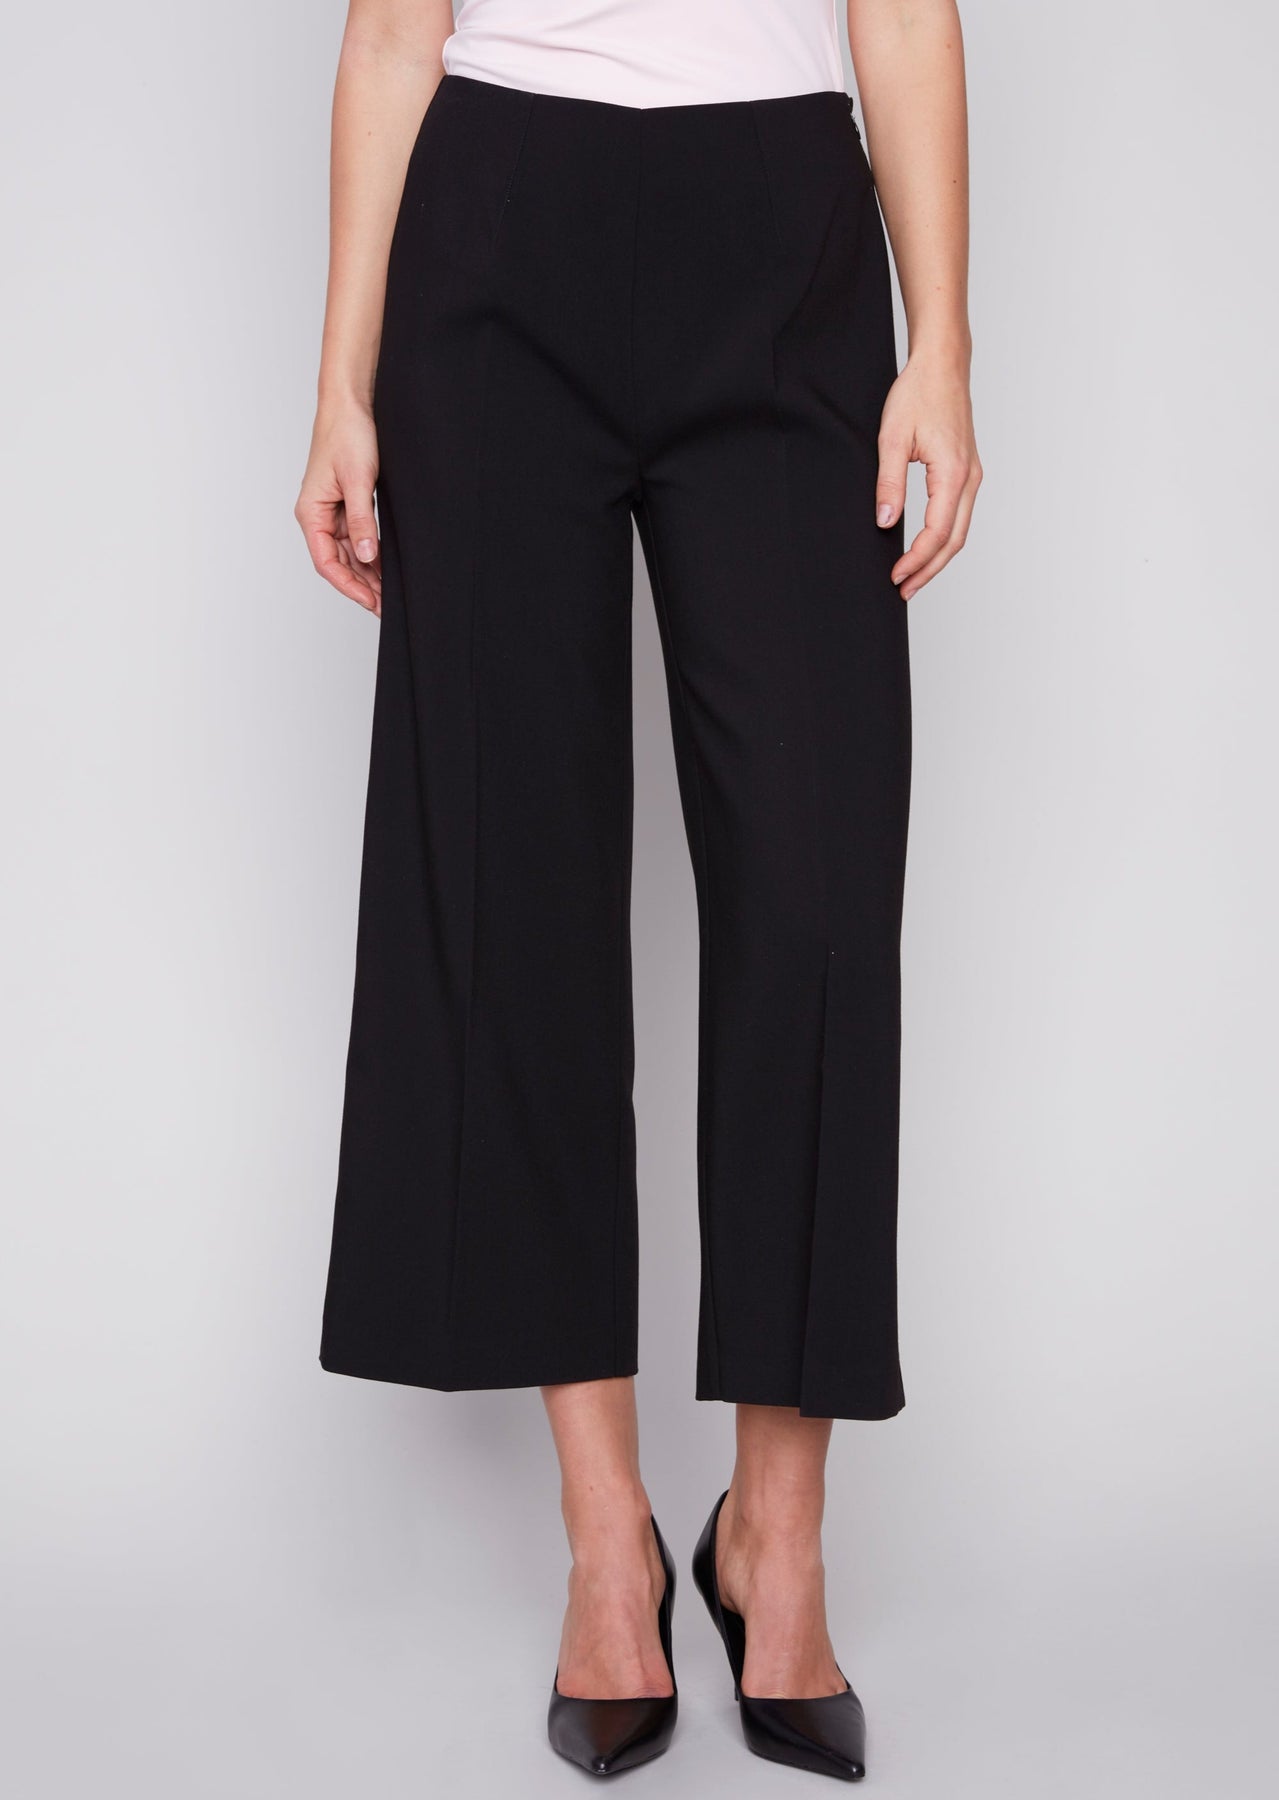 Pants With Size zipper and Wide Leg - Black